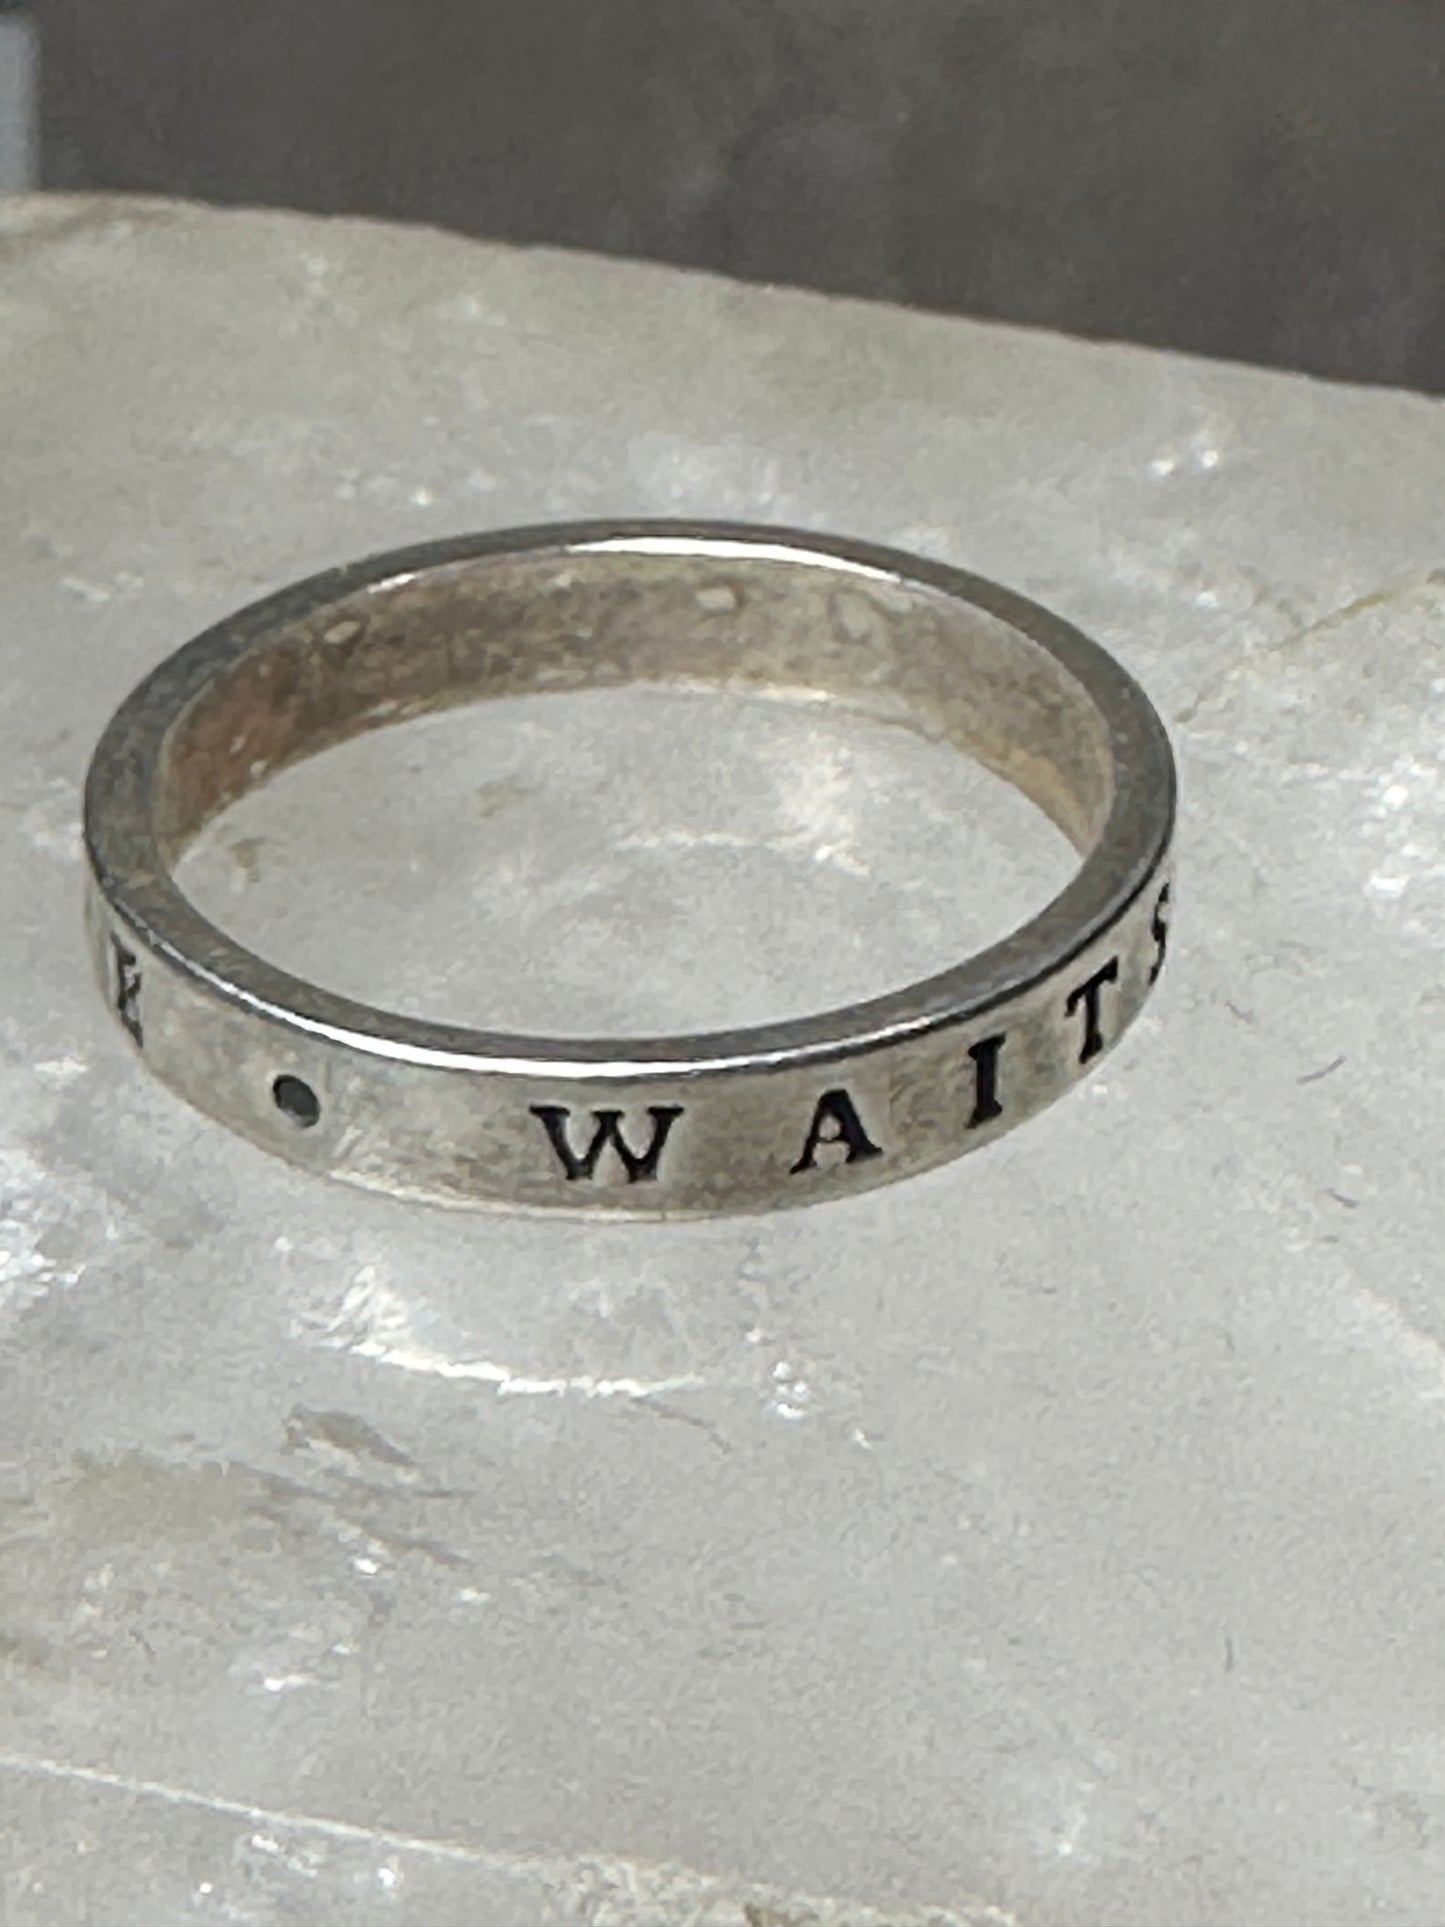 True Love Waits ring word band size 7 sterling silver women